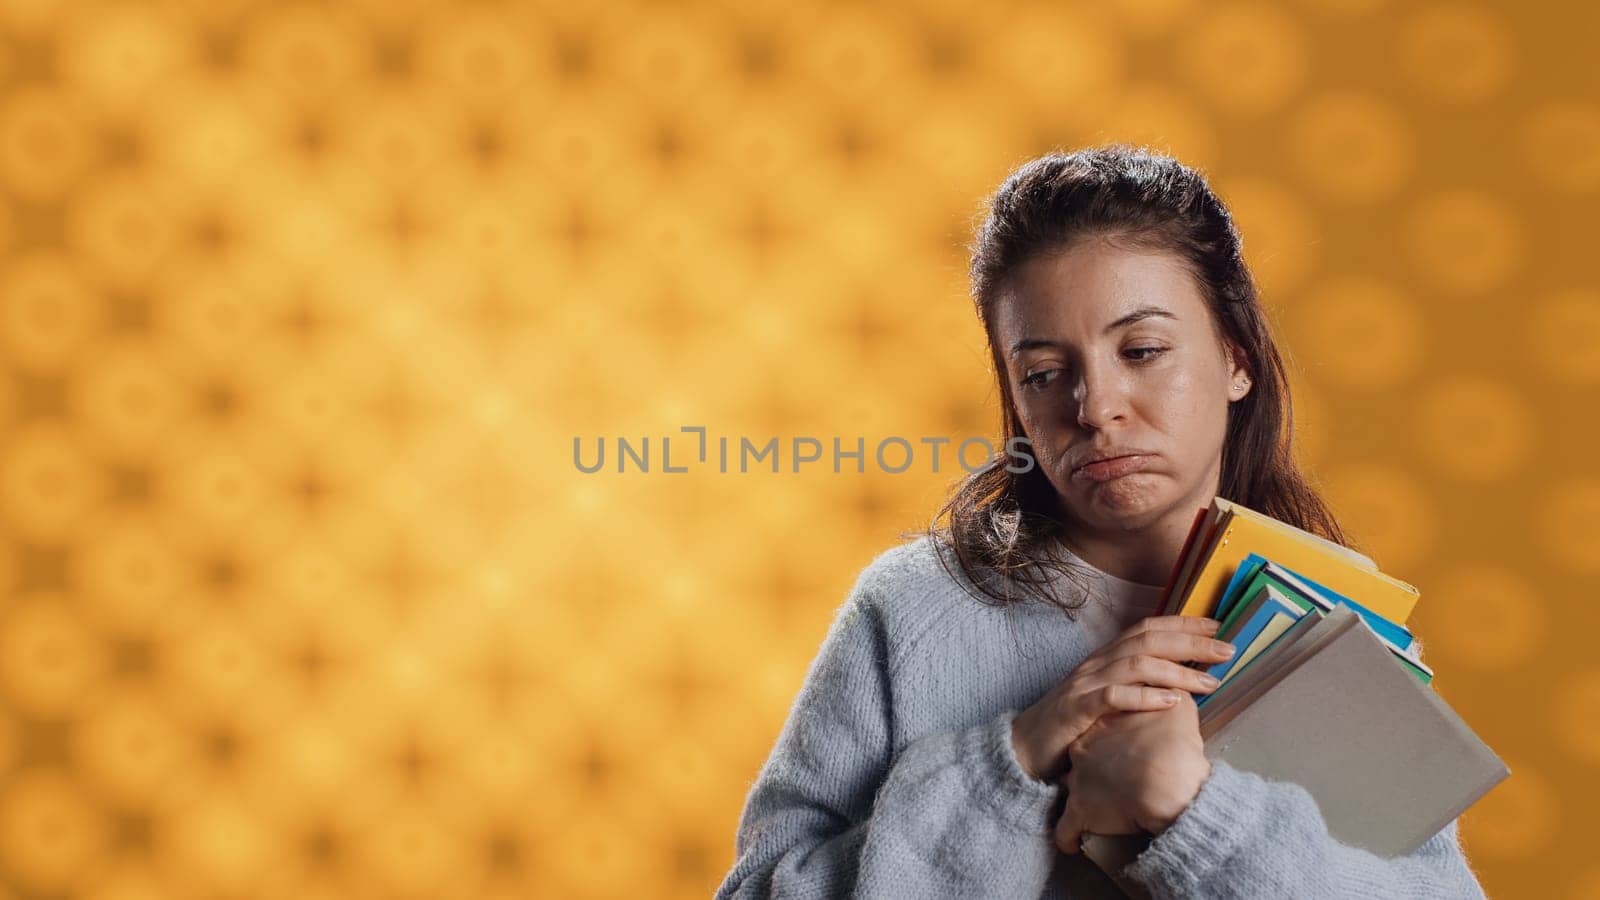 Exhausted woman yawning, holding heavy stack of books needed for school exam by DCStudio